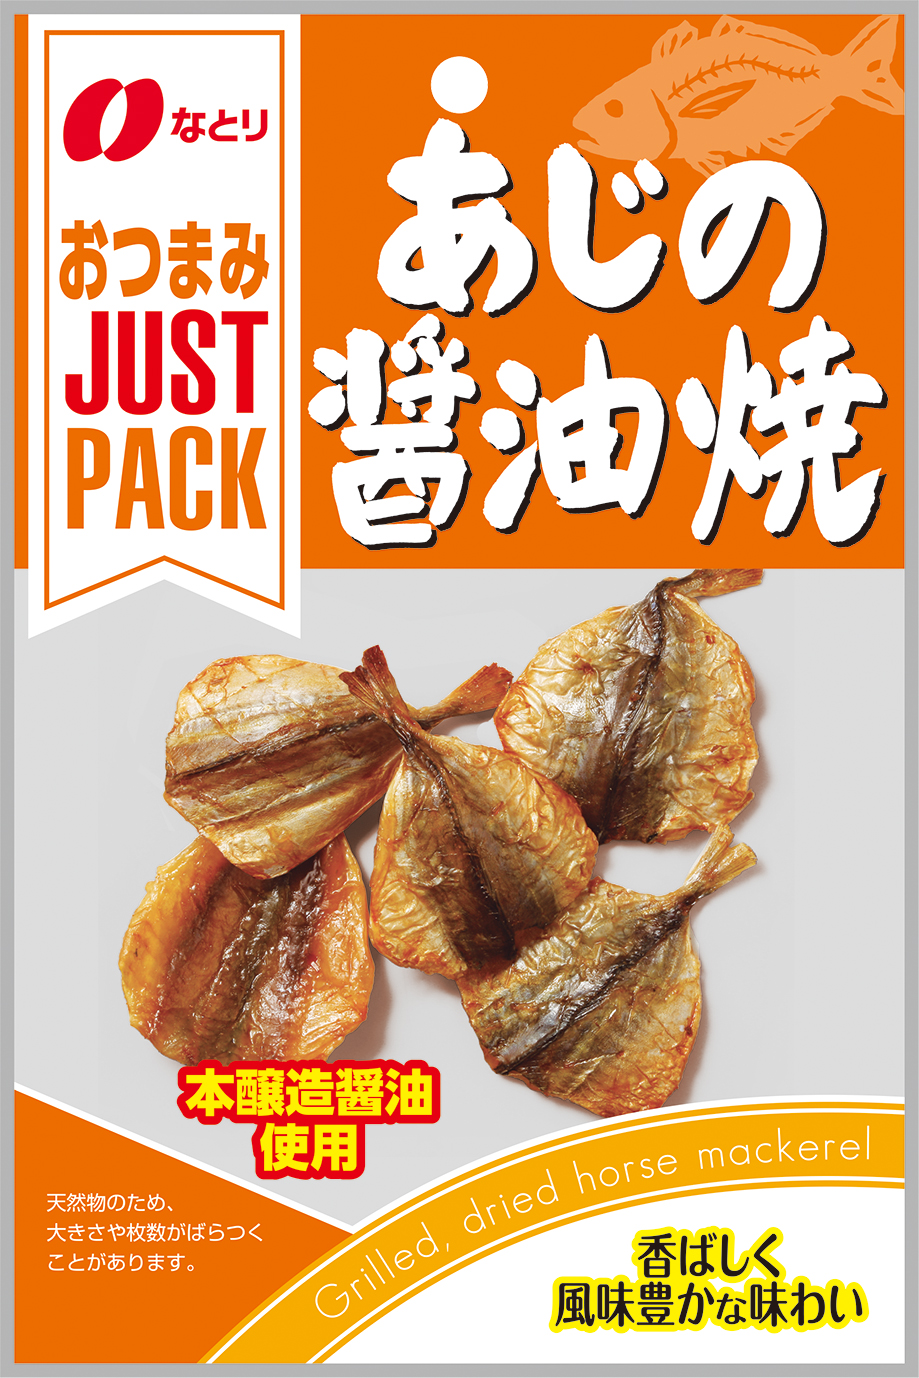 JUST PACK<br>あじの醤油焼